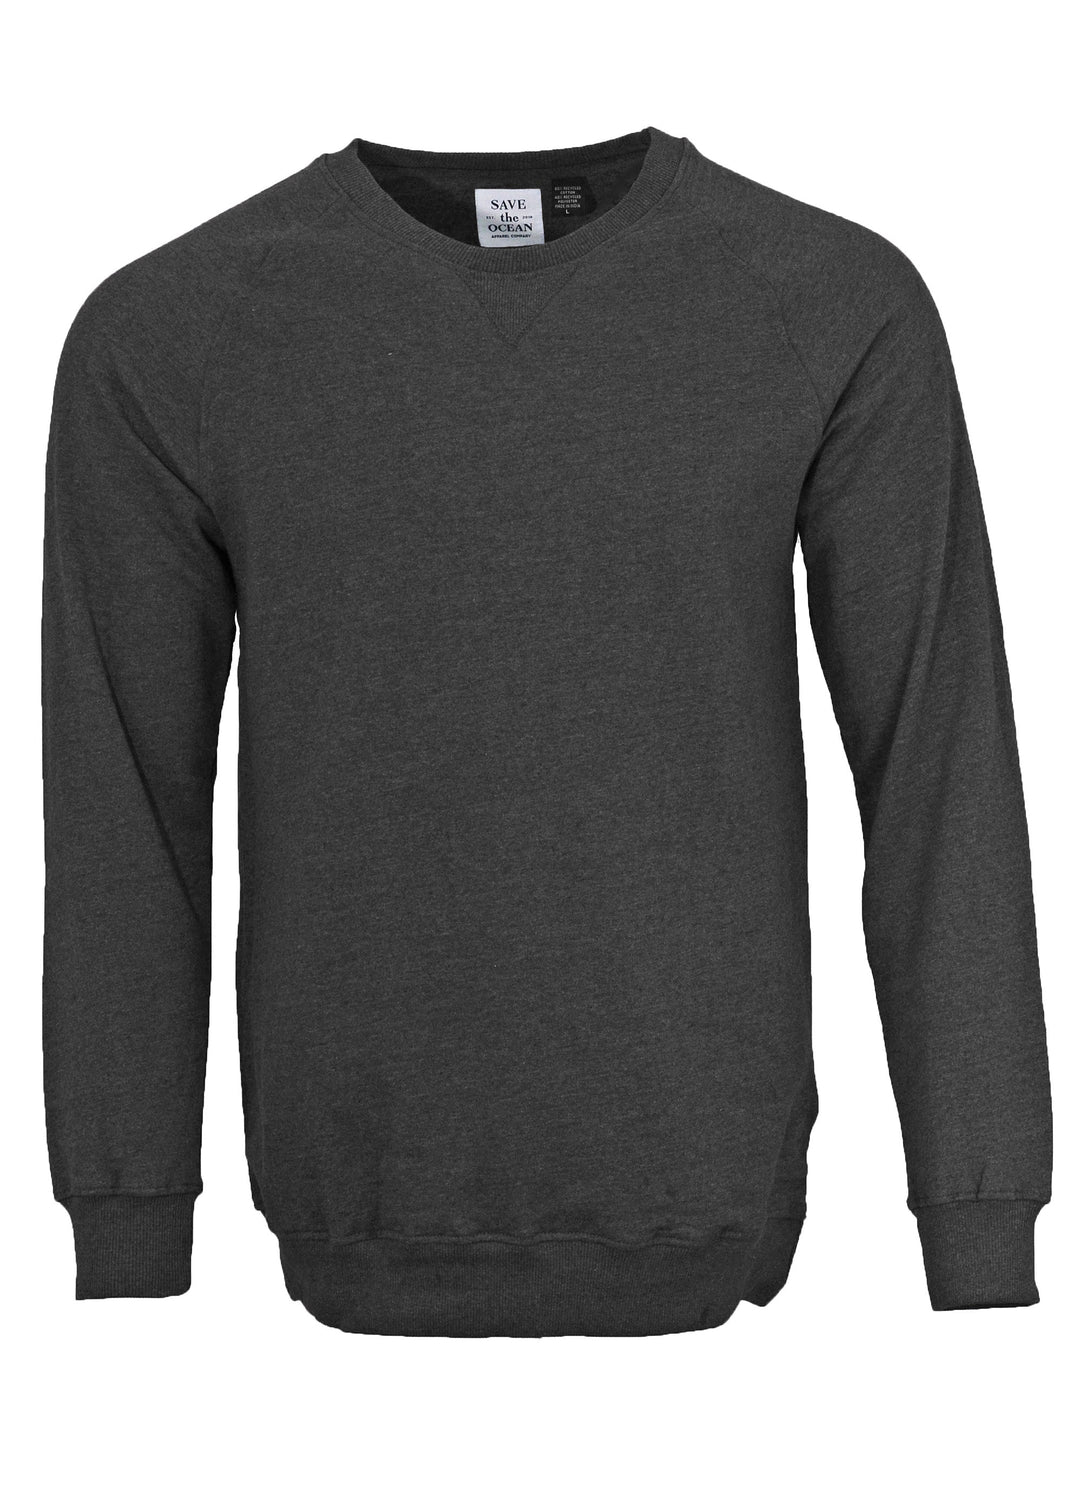 Save The Ocean Recycled Crew Sweater